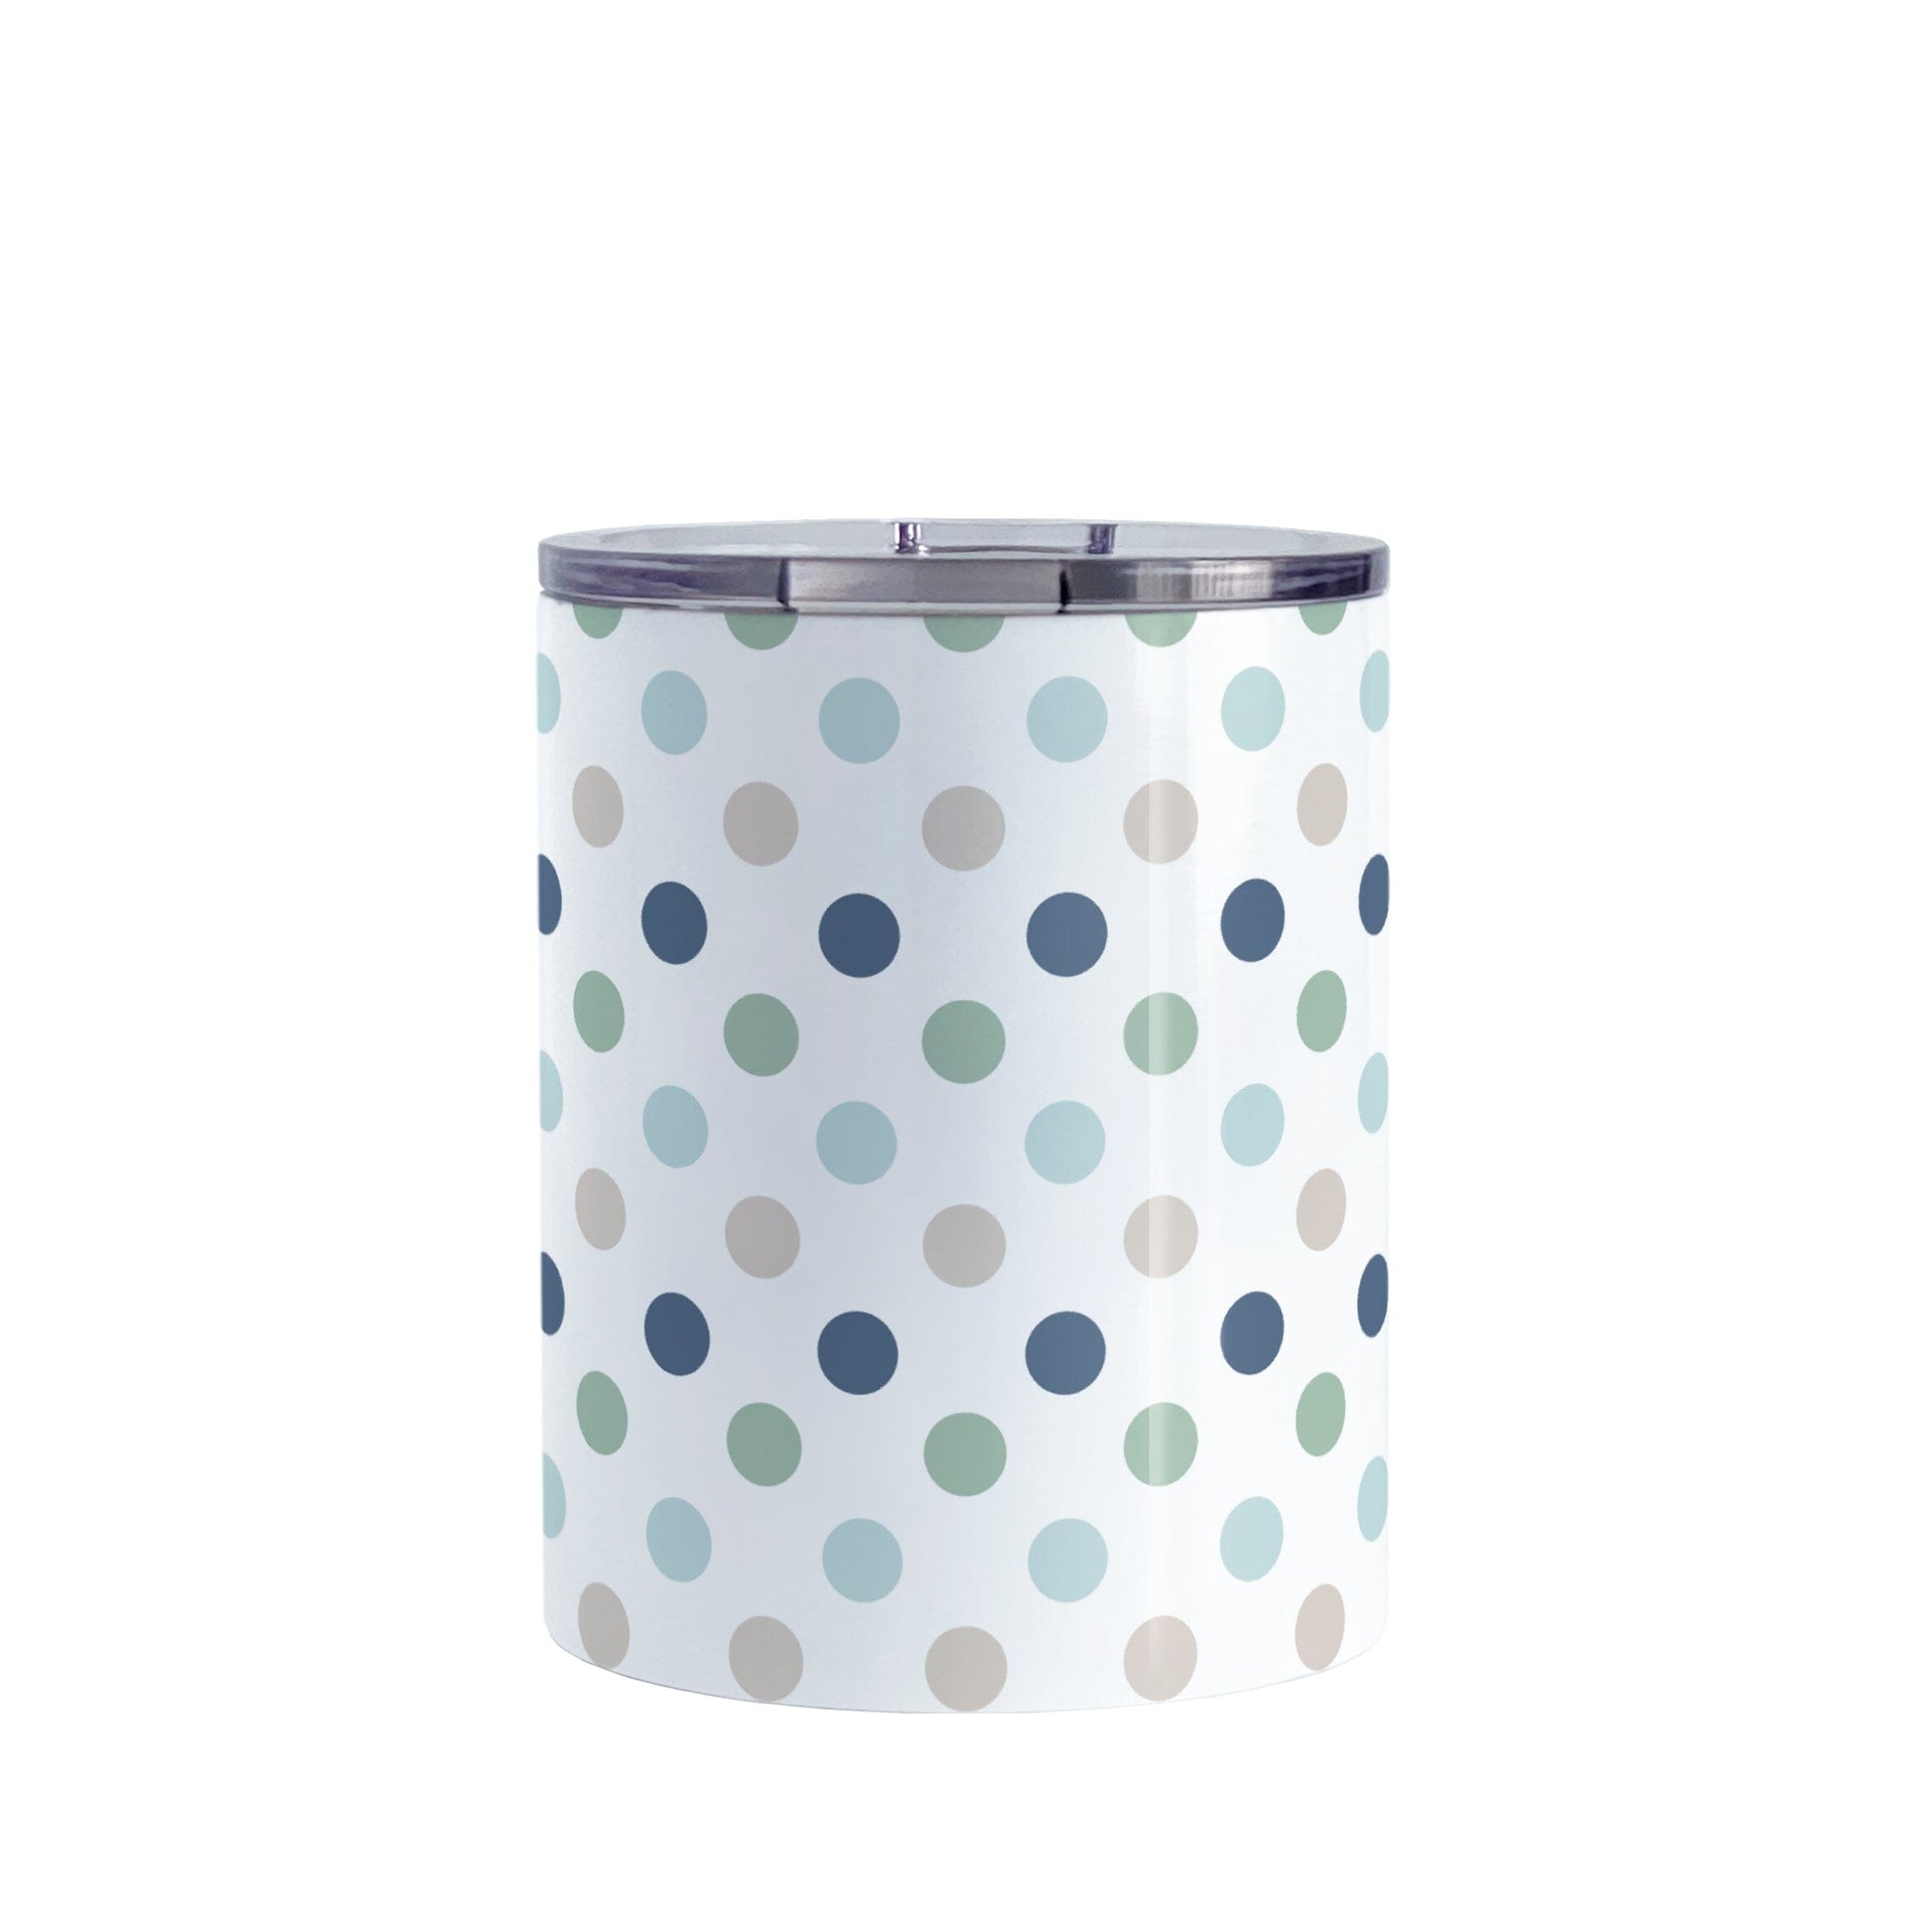 Coastal Polka Dots Tumbler Cup (10oz) at Amy's Coffee Mugs. A stainless steel tumbler cup designed with a pattern of polka dots in a coastal color scheme that wraps around the cup. 